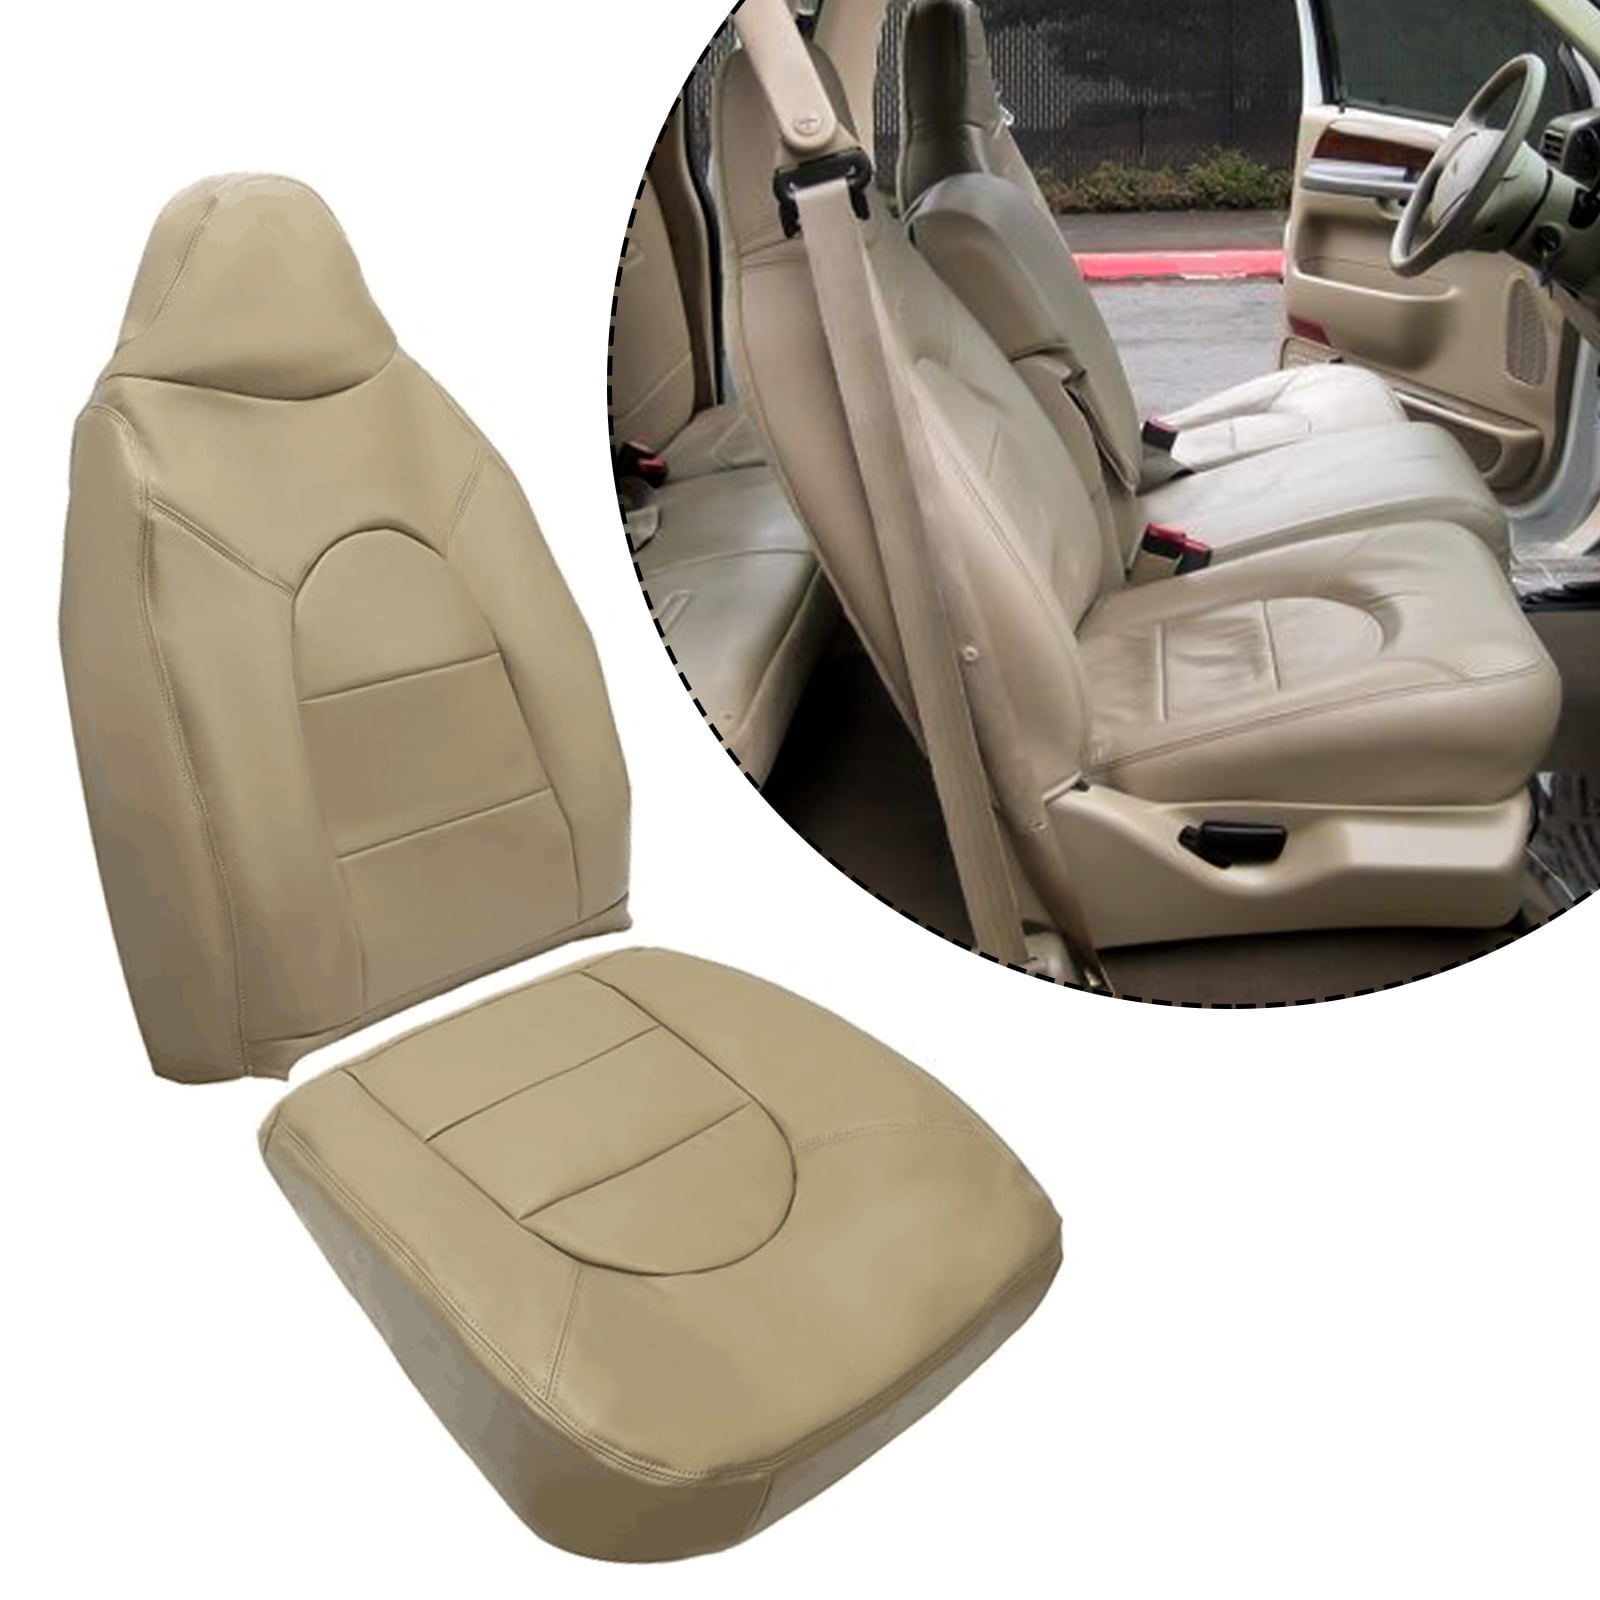 KUAFU Leather Front Driver Seat Bottom Cover Compatible with 1999 2000 Ford F250 F350 F450 Lariat Power Stroke Turbo Tan 